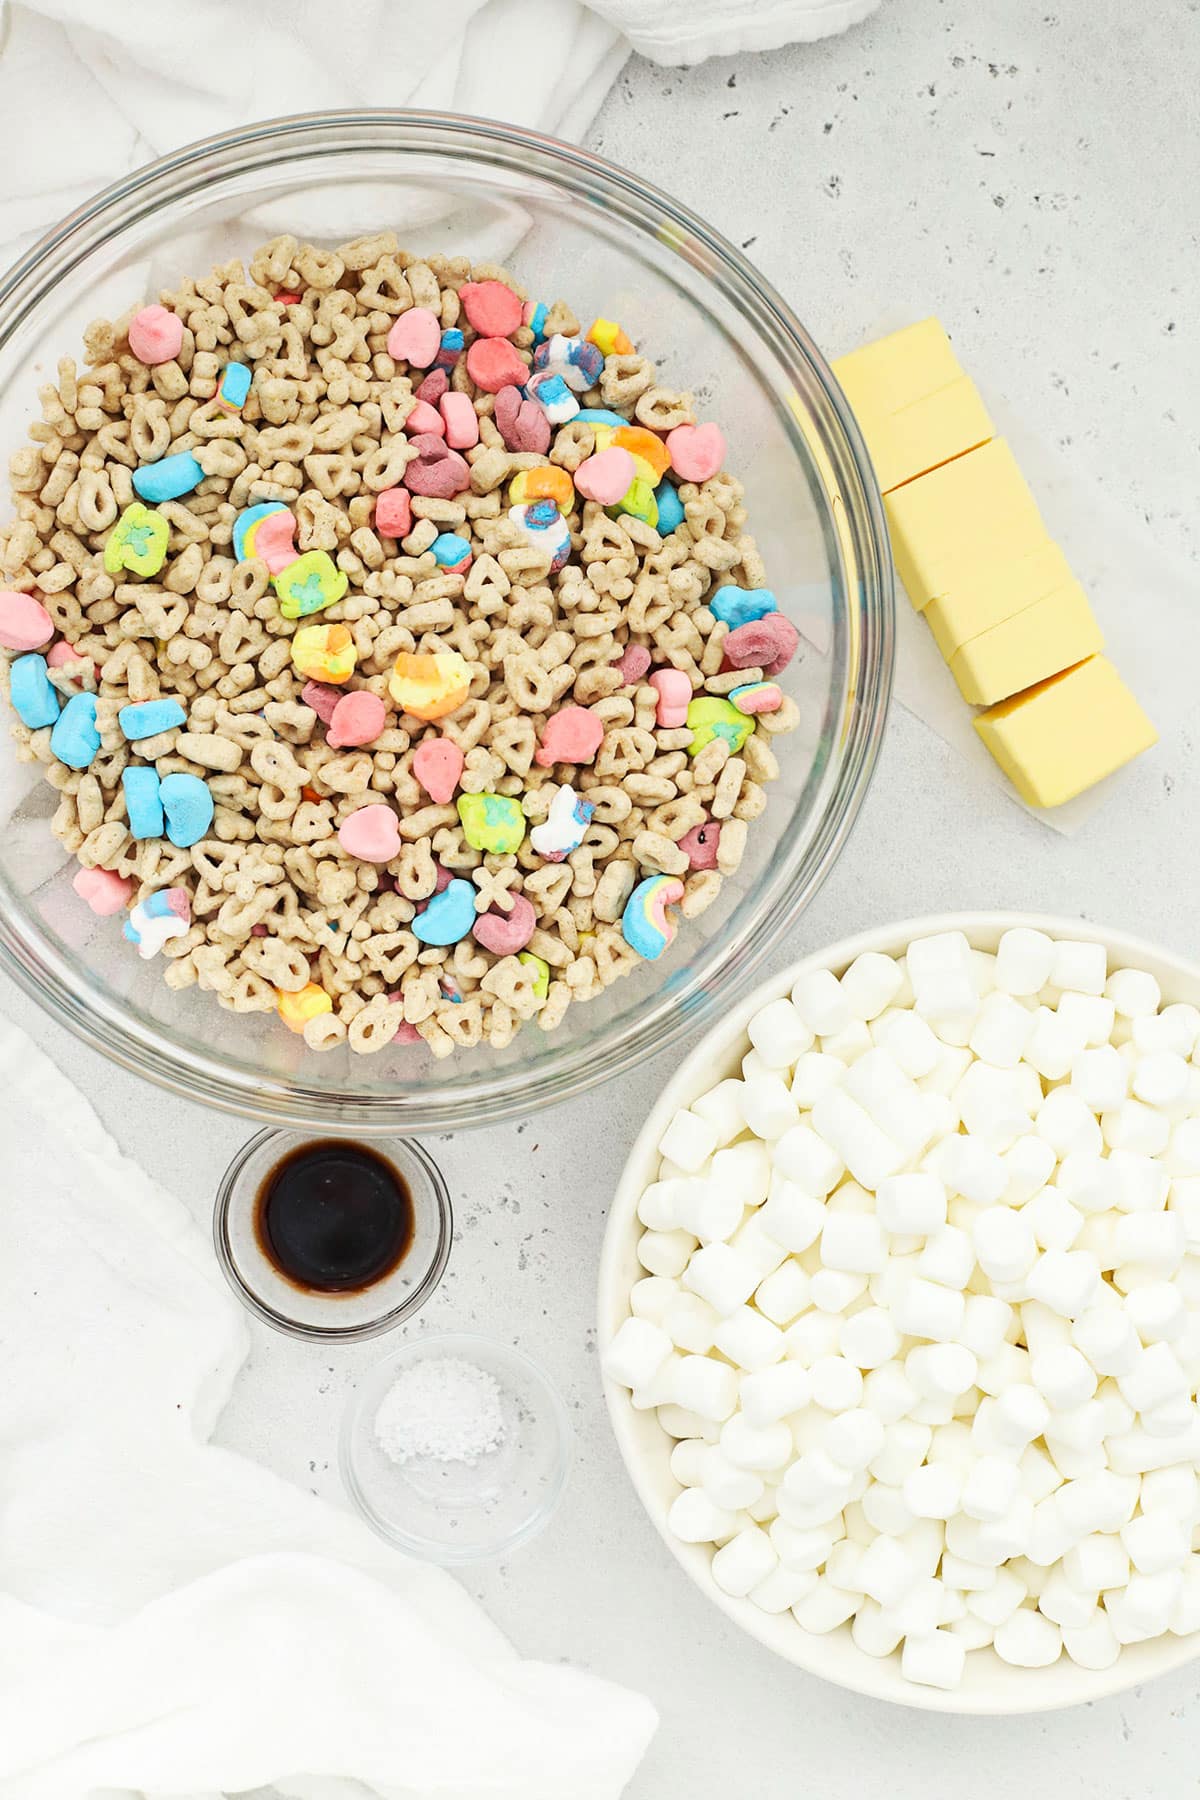 Ingredients for lucky charms treats